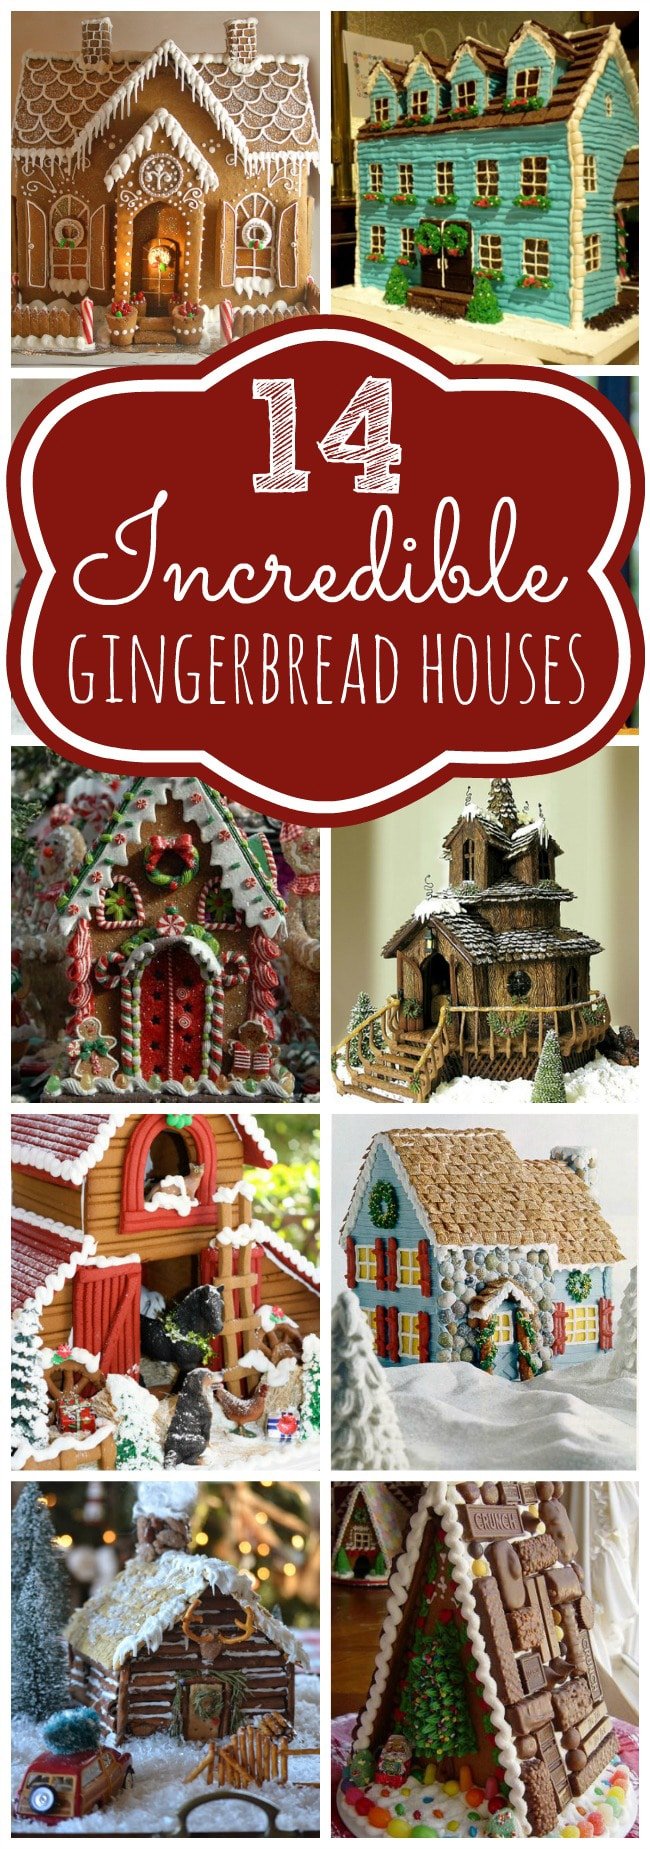 Amazing Gingerbread House Ideas on Pretty My Party